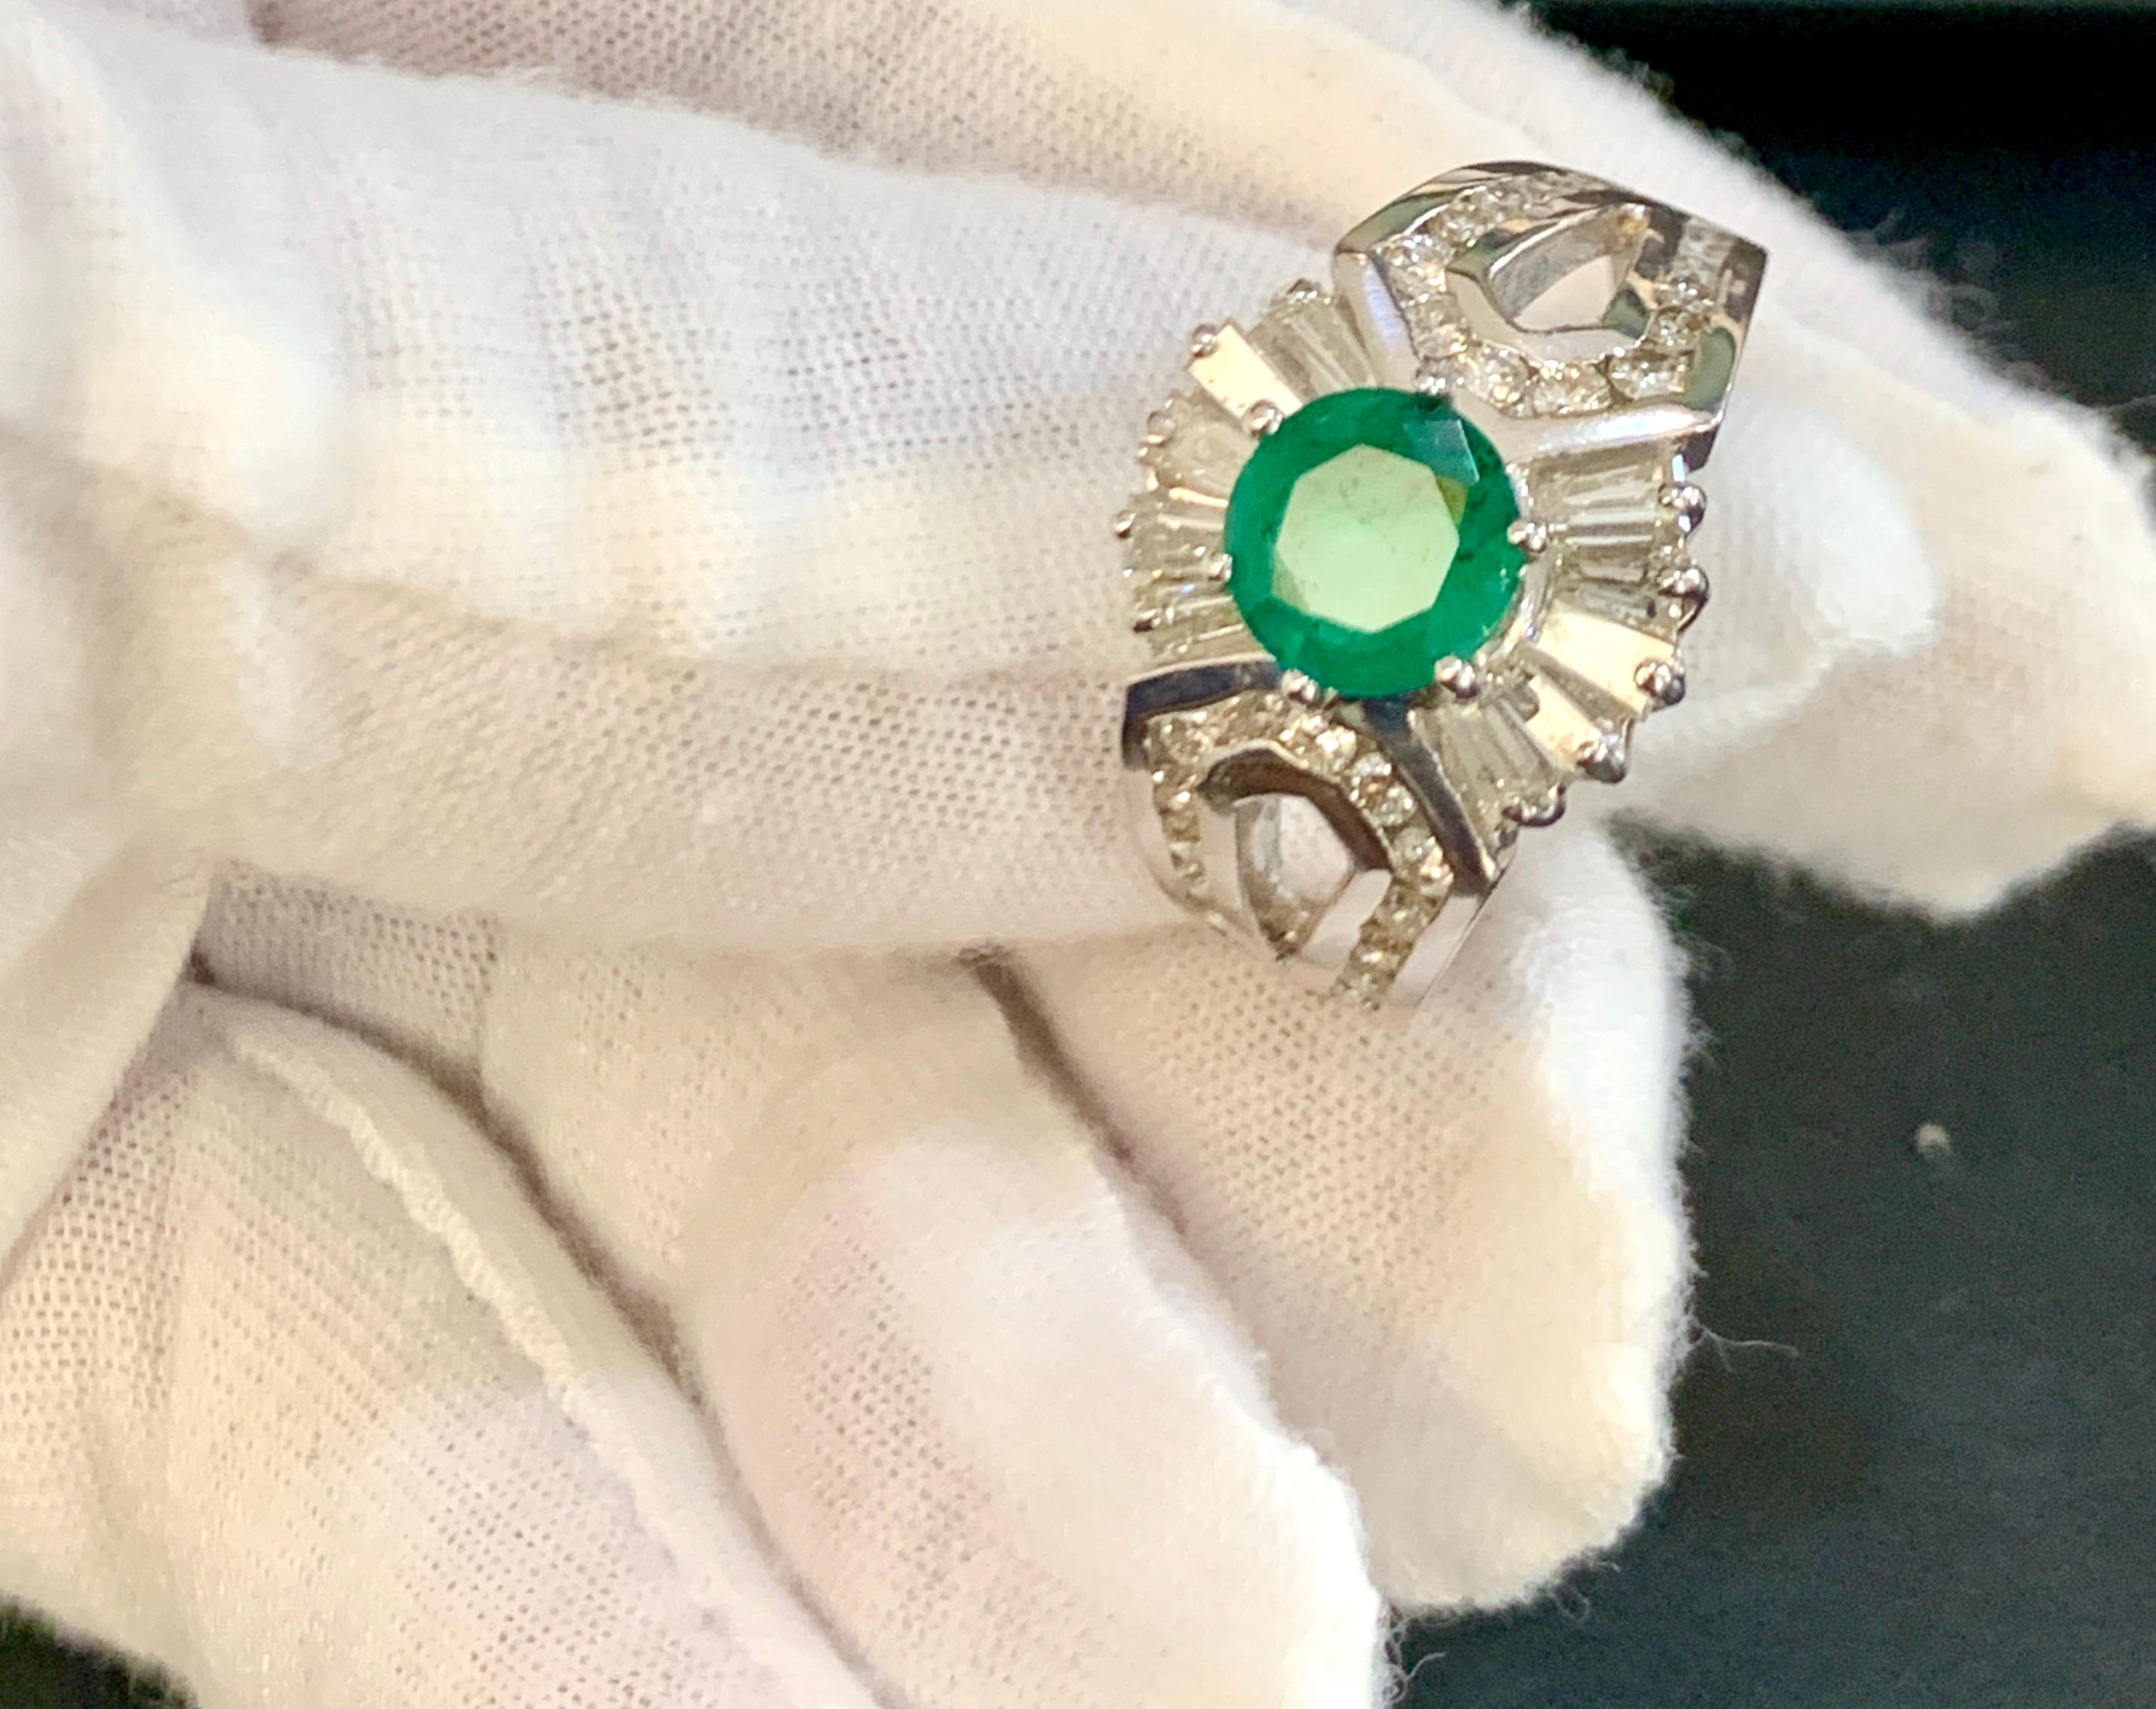 1.5 Carat Round Cut Emerald and 1.2 Carat Diamond Ring 18 Karat White Gold In Excellent Condition For Sale In New York, NY